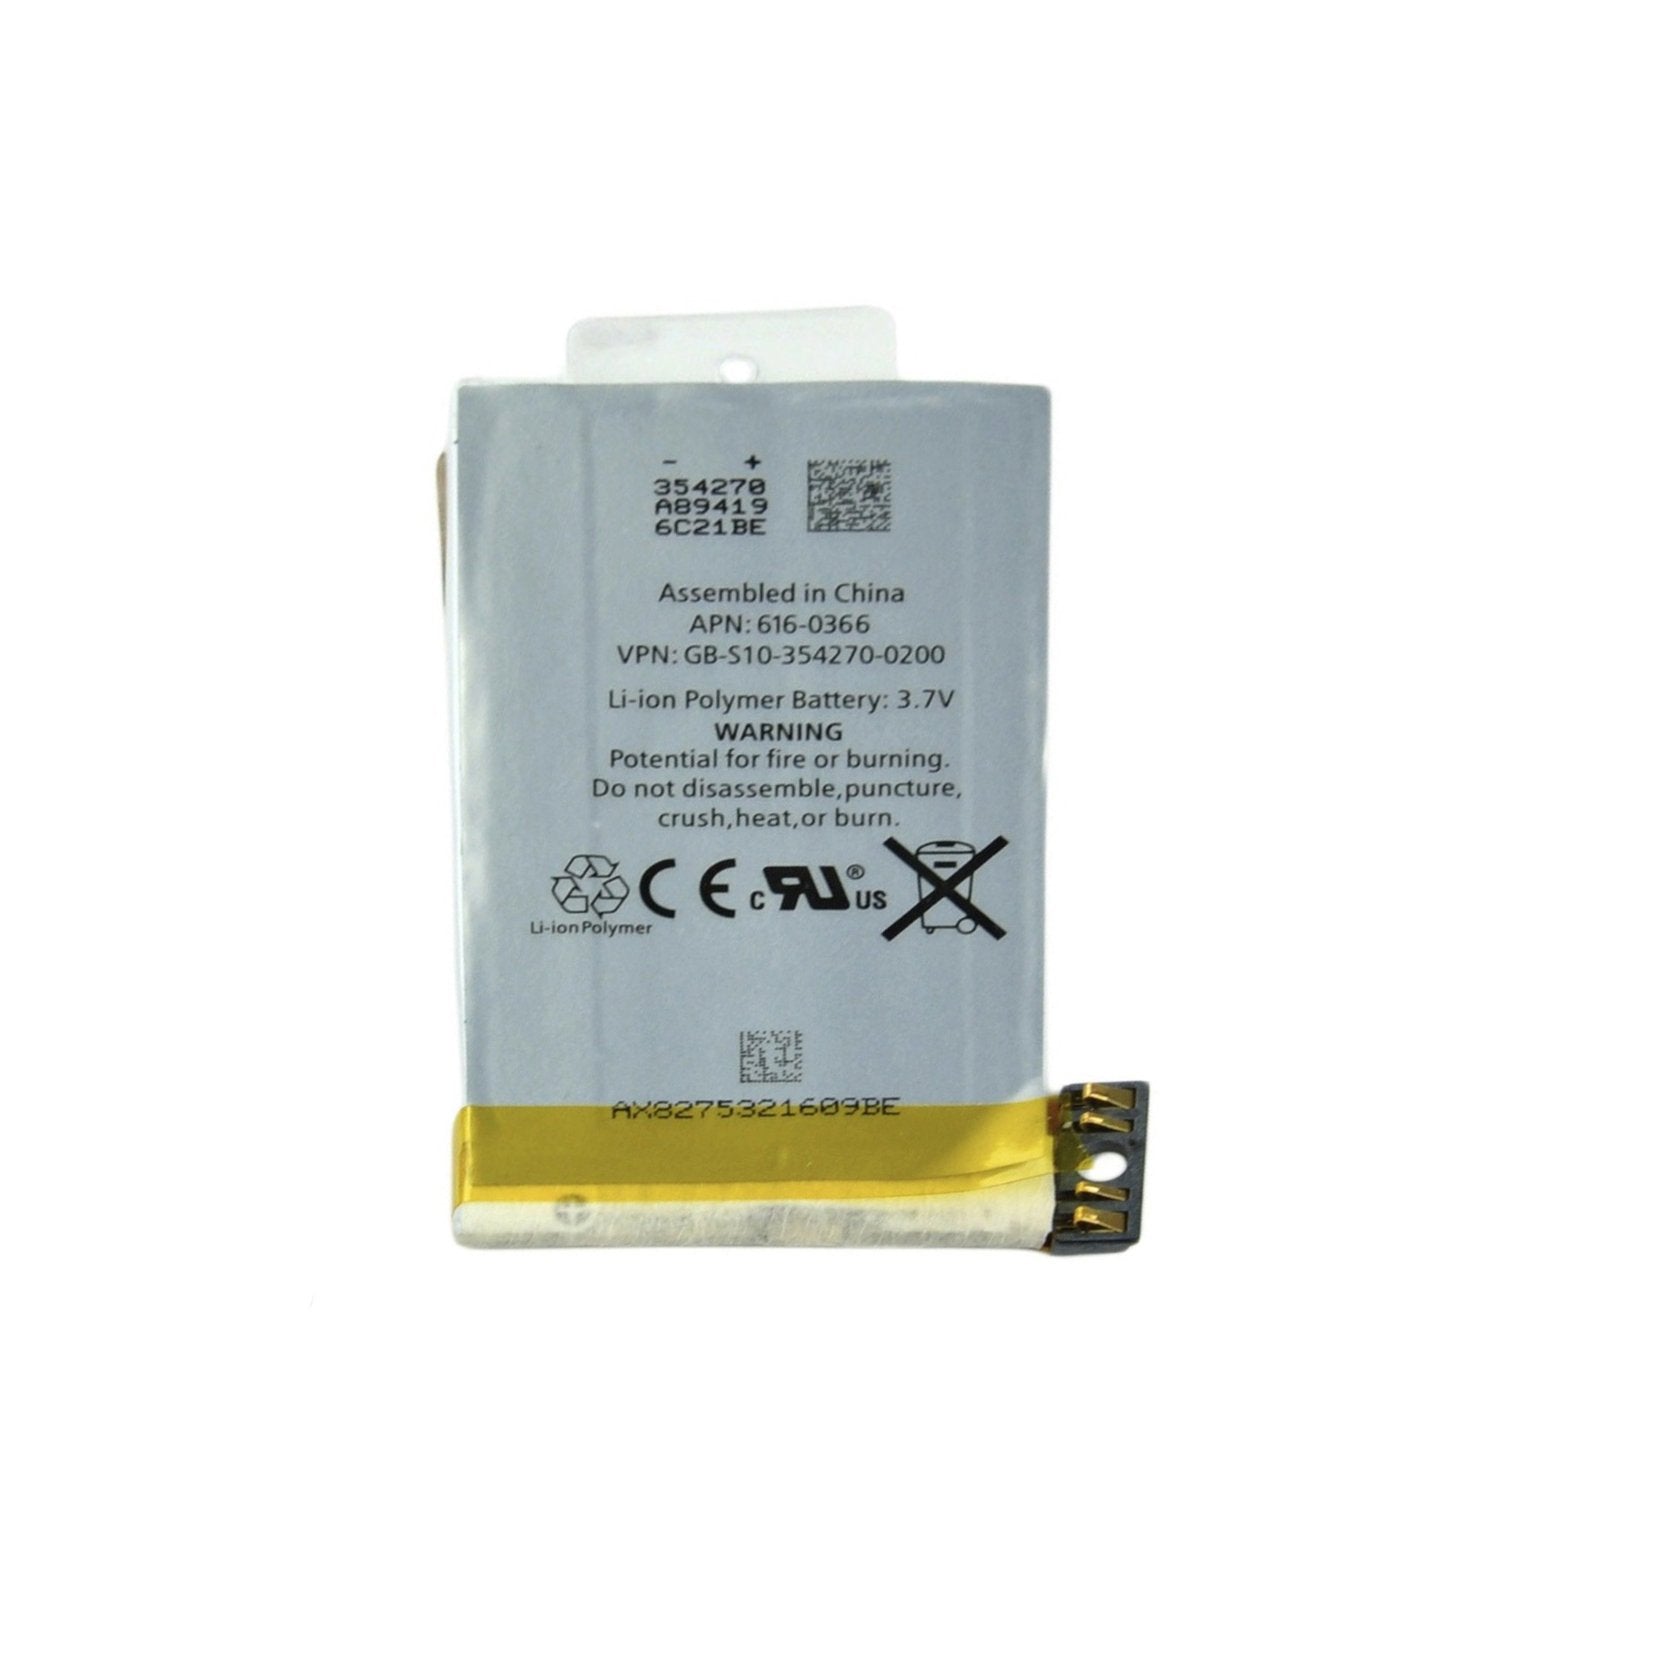 iPhone 3G Battery